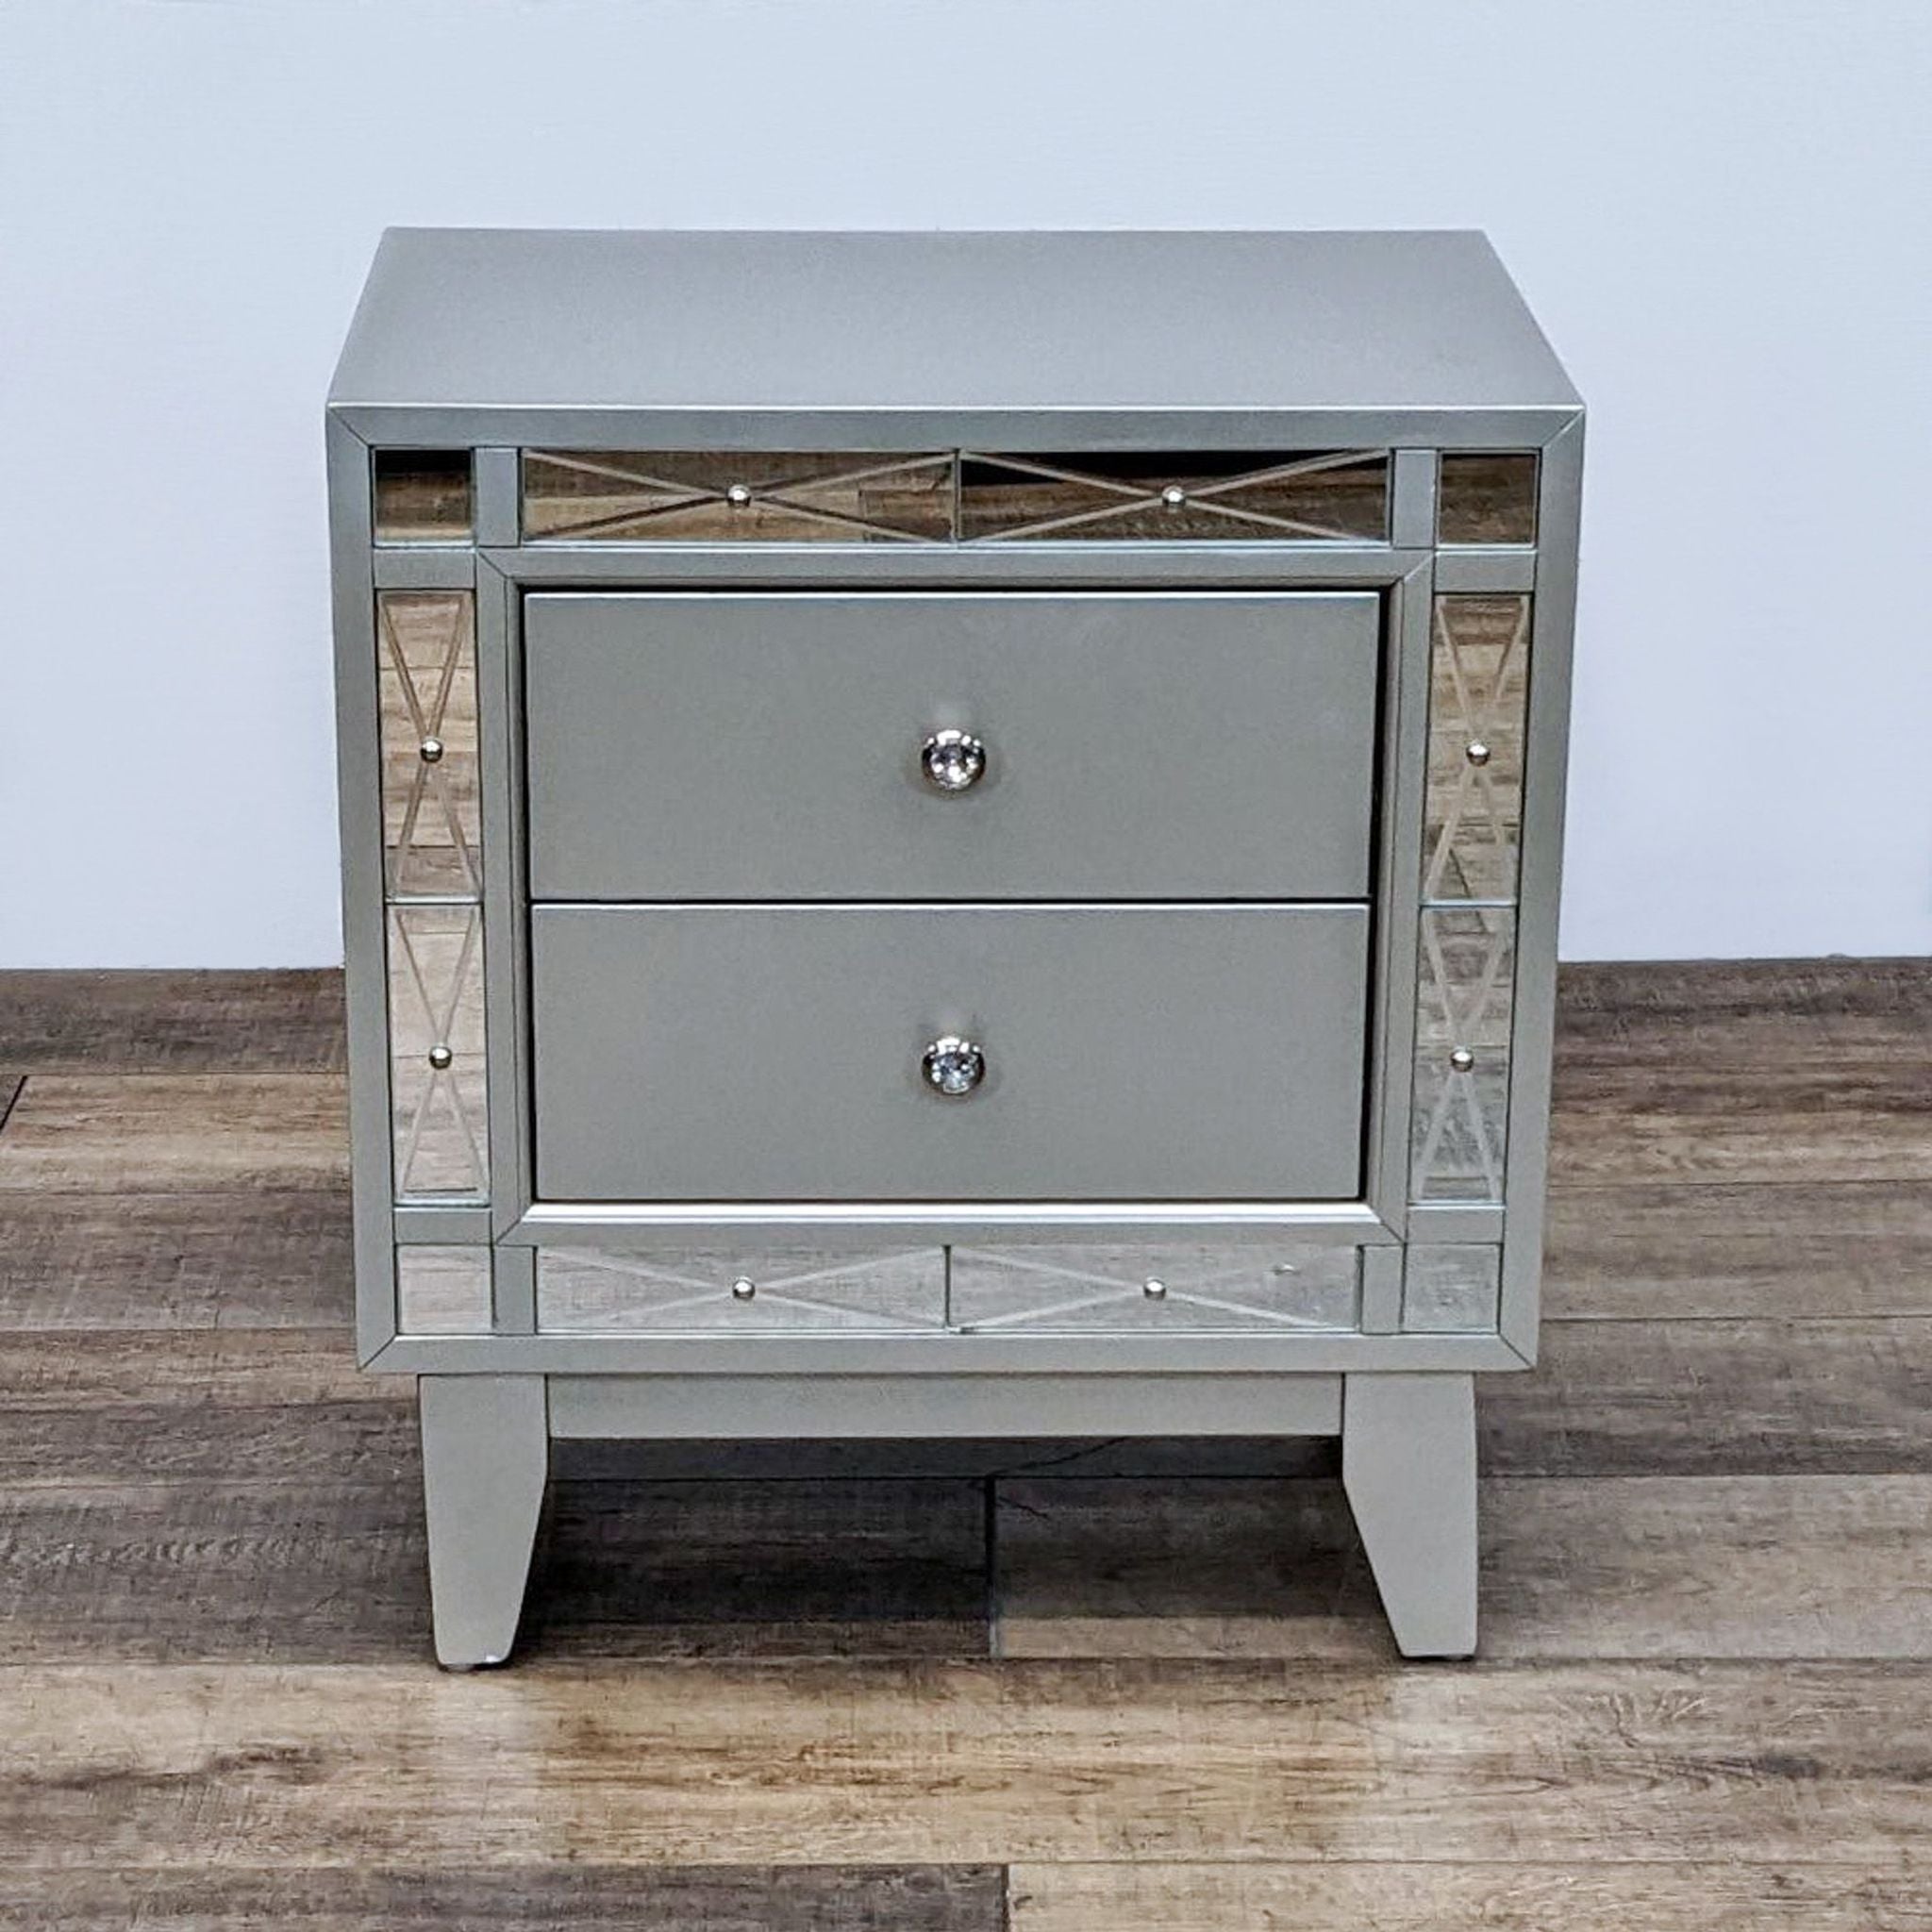 Metallic mercury finish nightstand with retro-inspired legs and etched mirror panels by Coaster Fine Furniture.